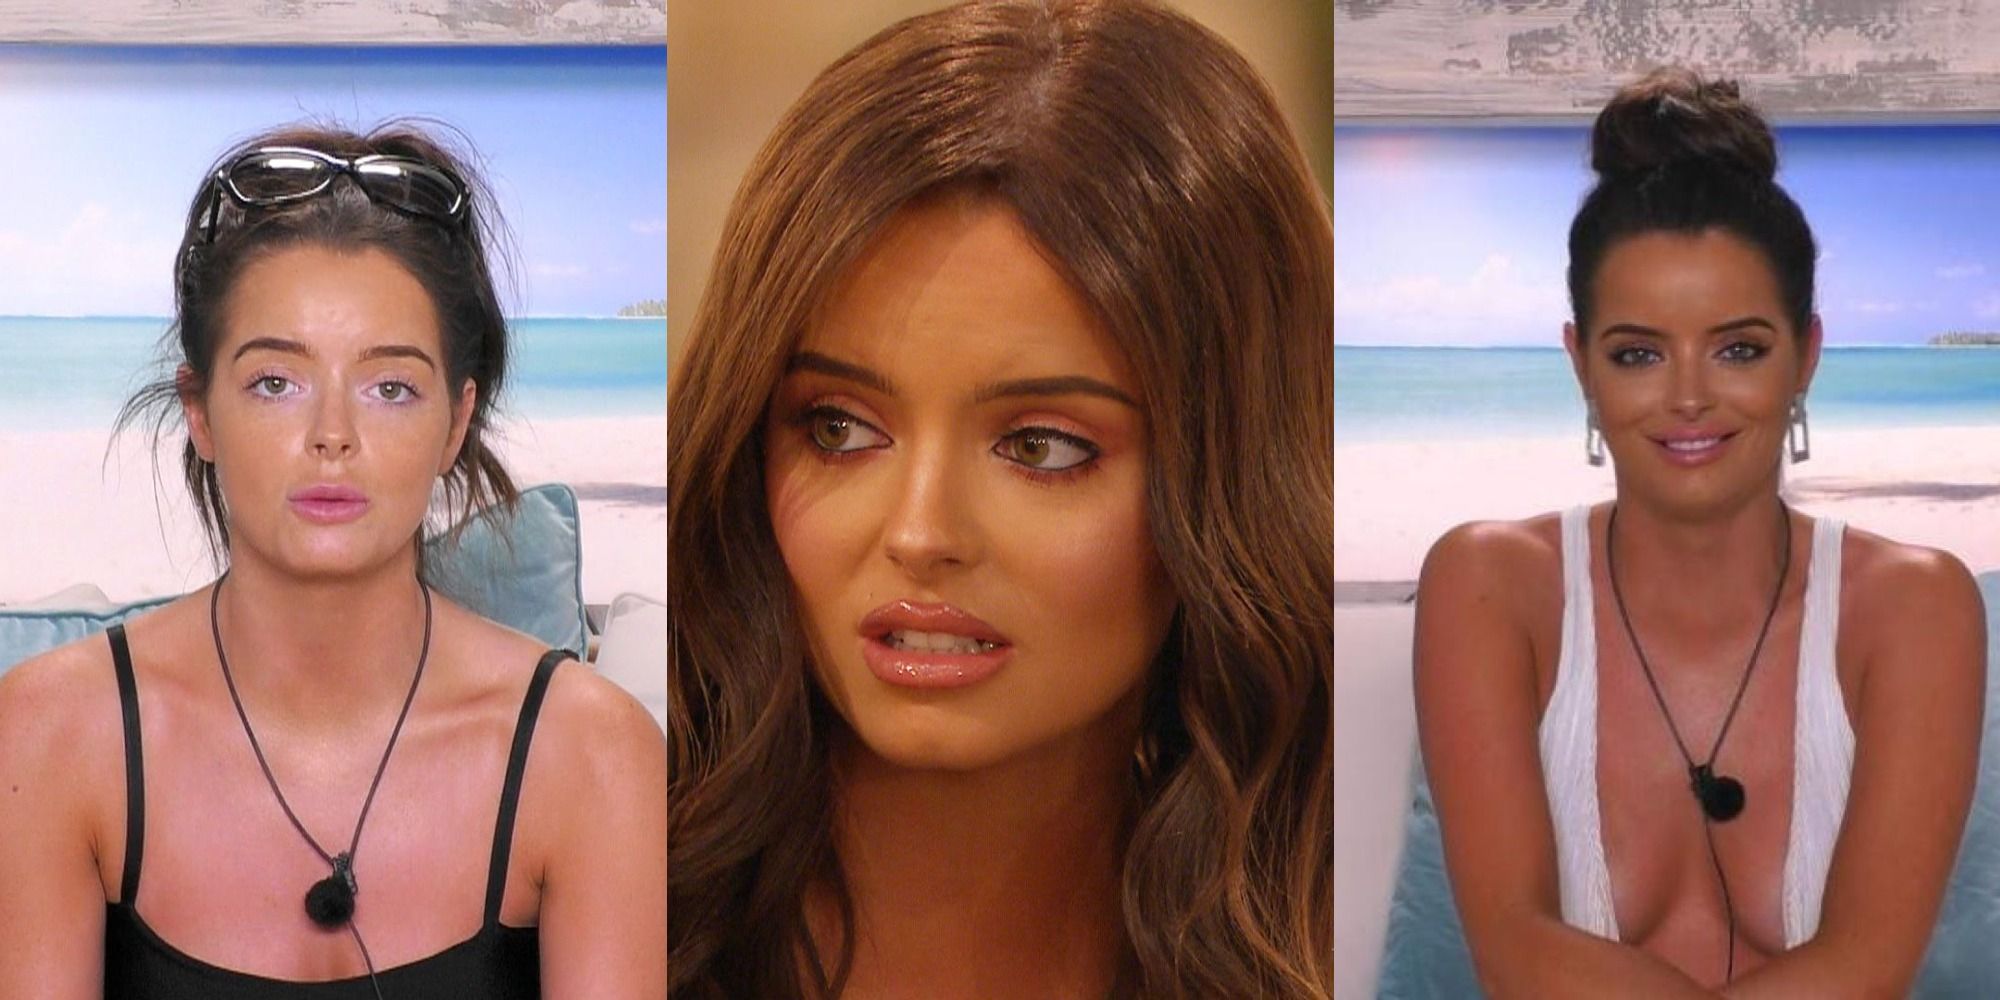 Three images of Maura Higgins from Love Island